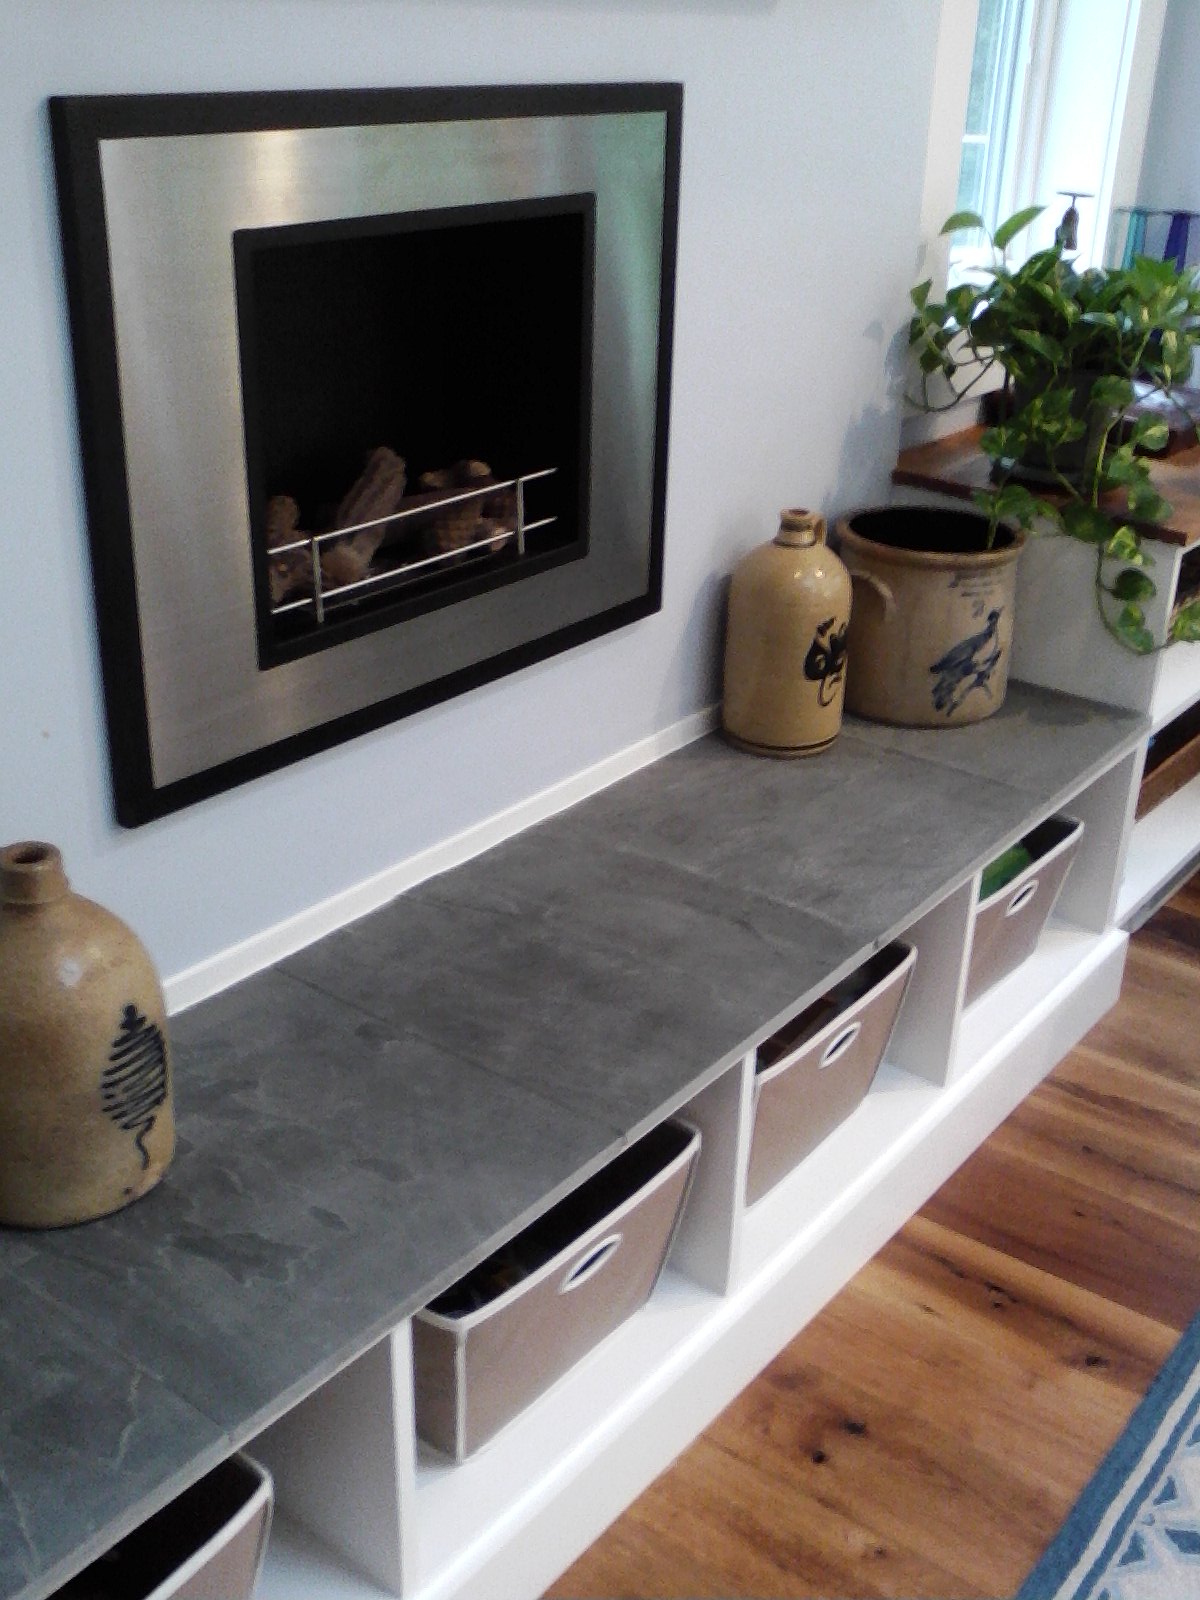 AFTER: A VERSATILE BLUESTONE SEATING WITH STORAGE